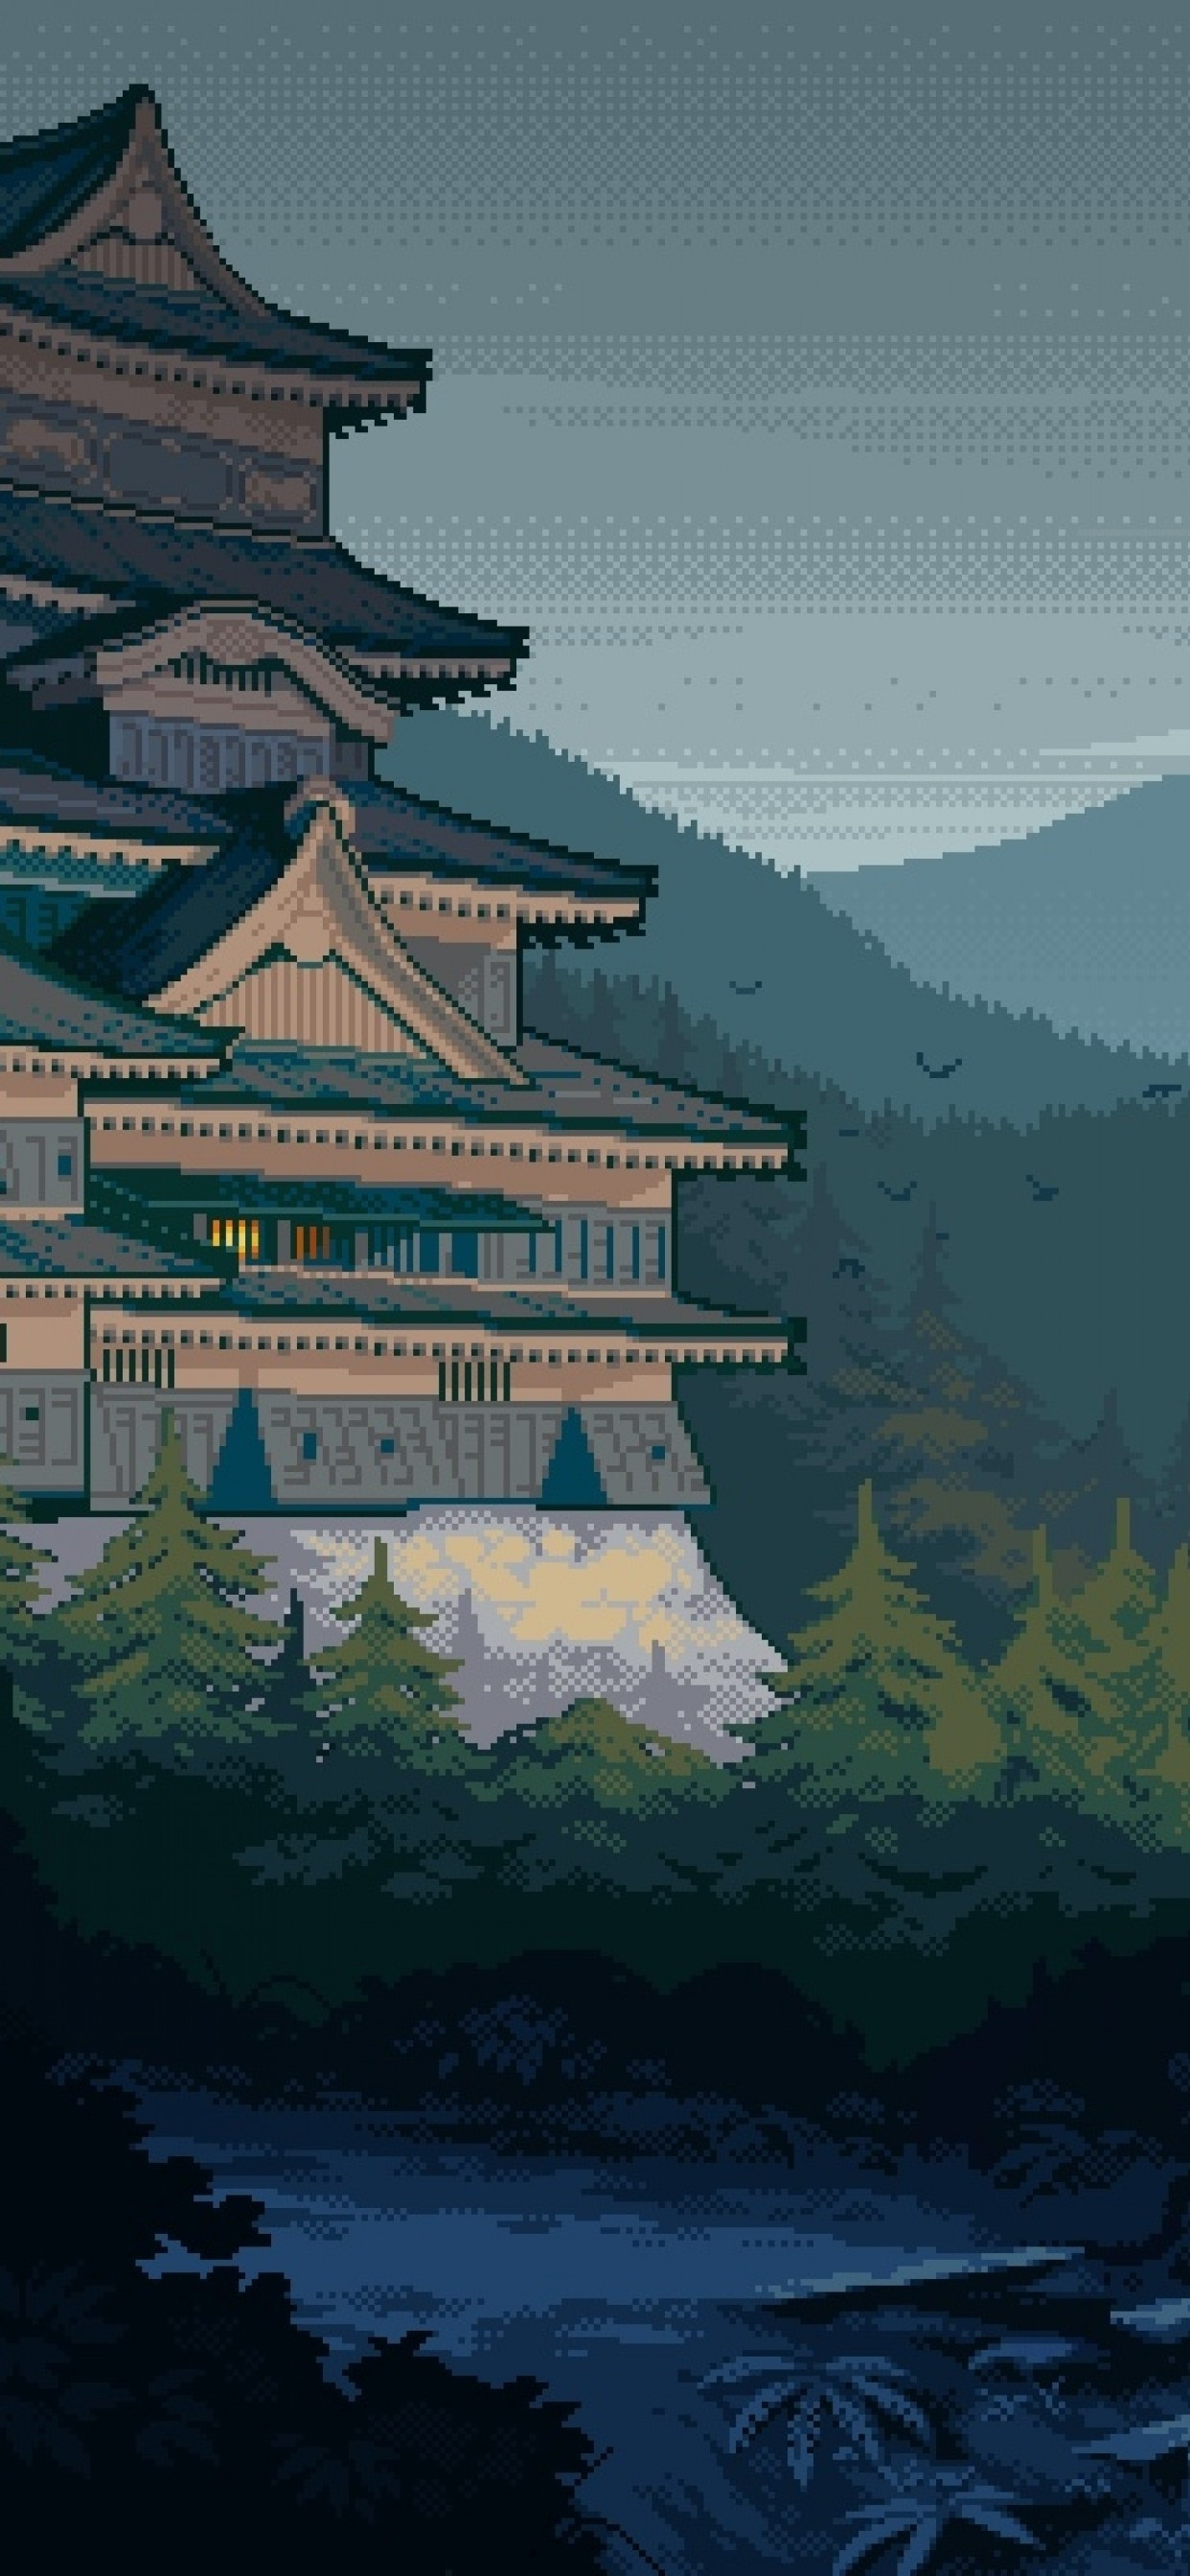 Download 1242x2688 Japanese House, Historical Building, Pixel Art, Mountain Wallpaper for iPhone 11 Pro Max & XS Max